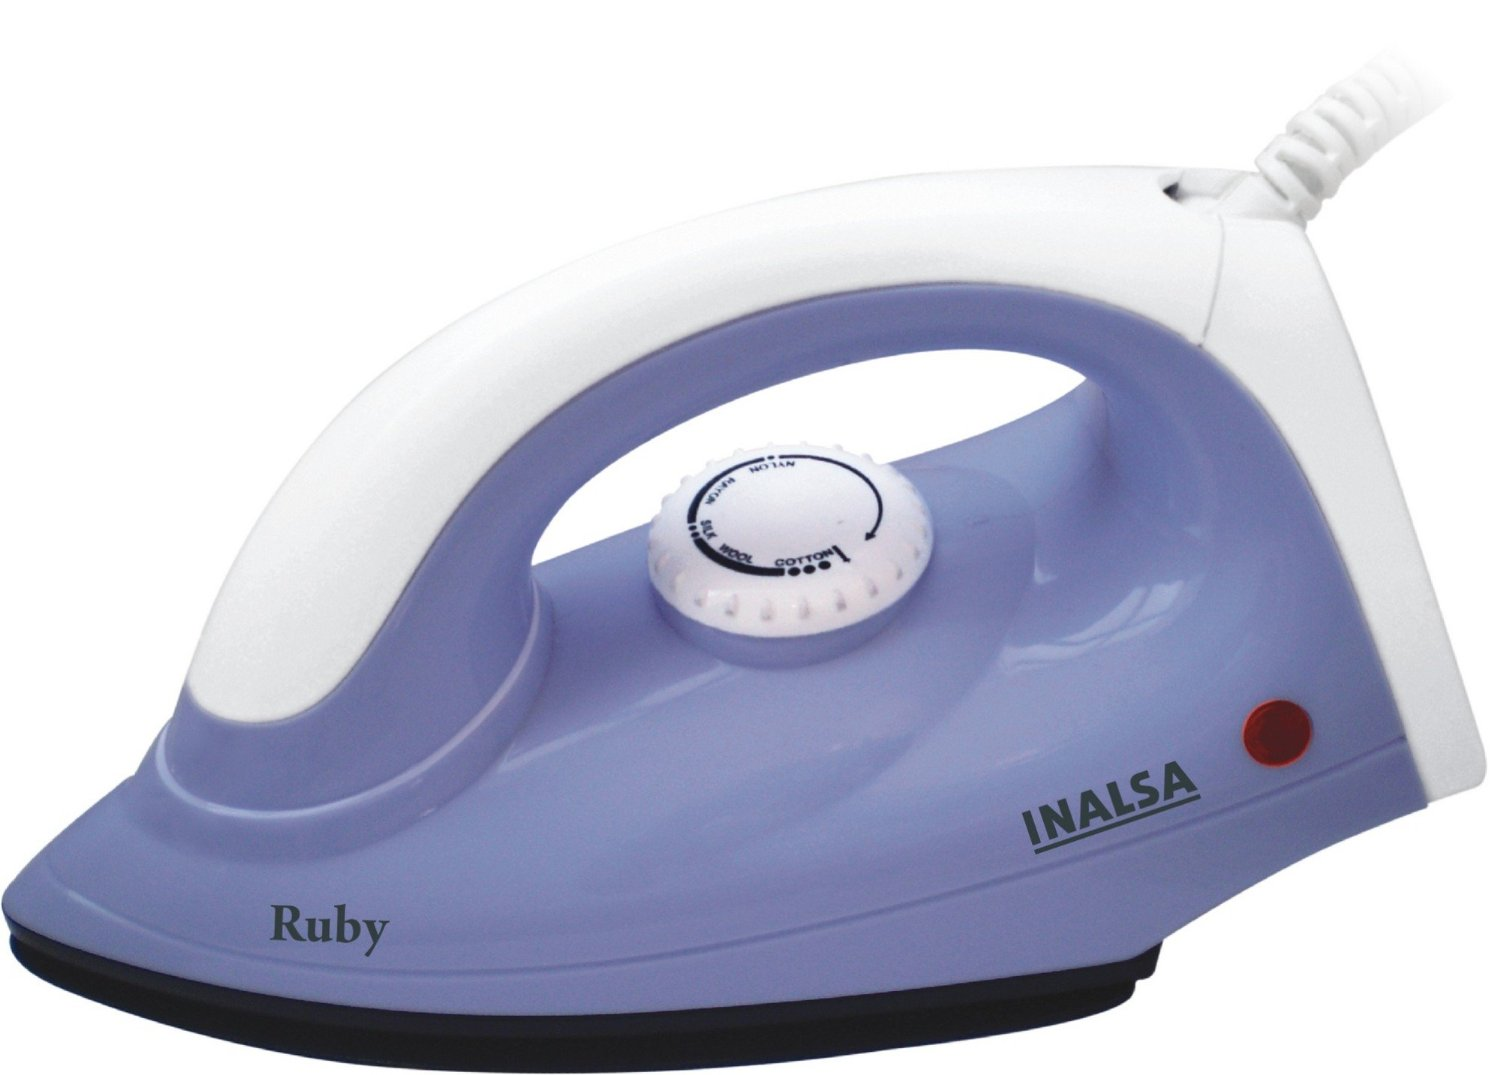 Amazon - Buy Inalsa Ruby 1000-Watt Dry Iron for just Rs.299 (70% off)